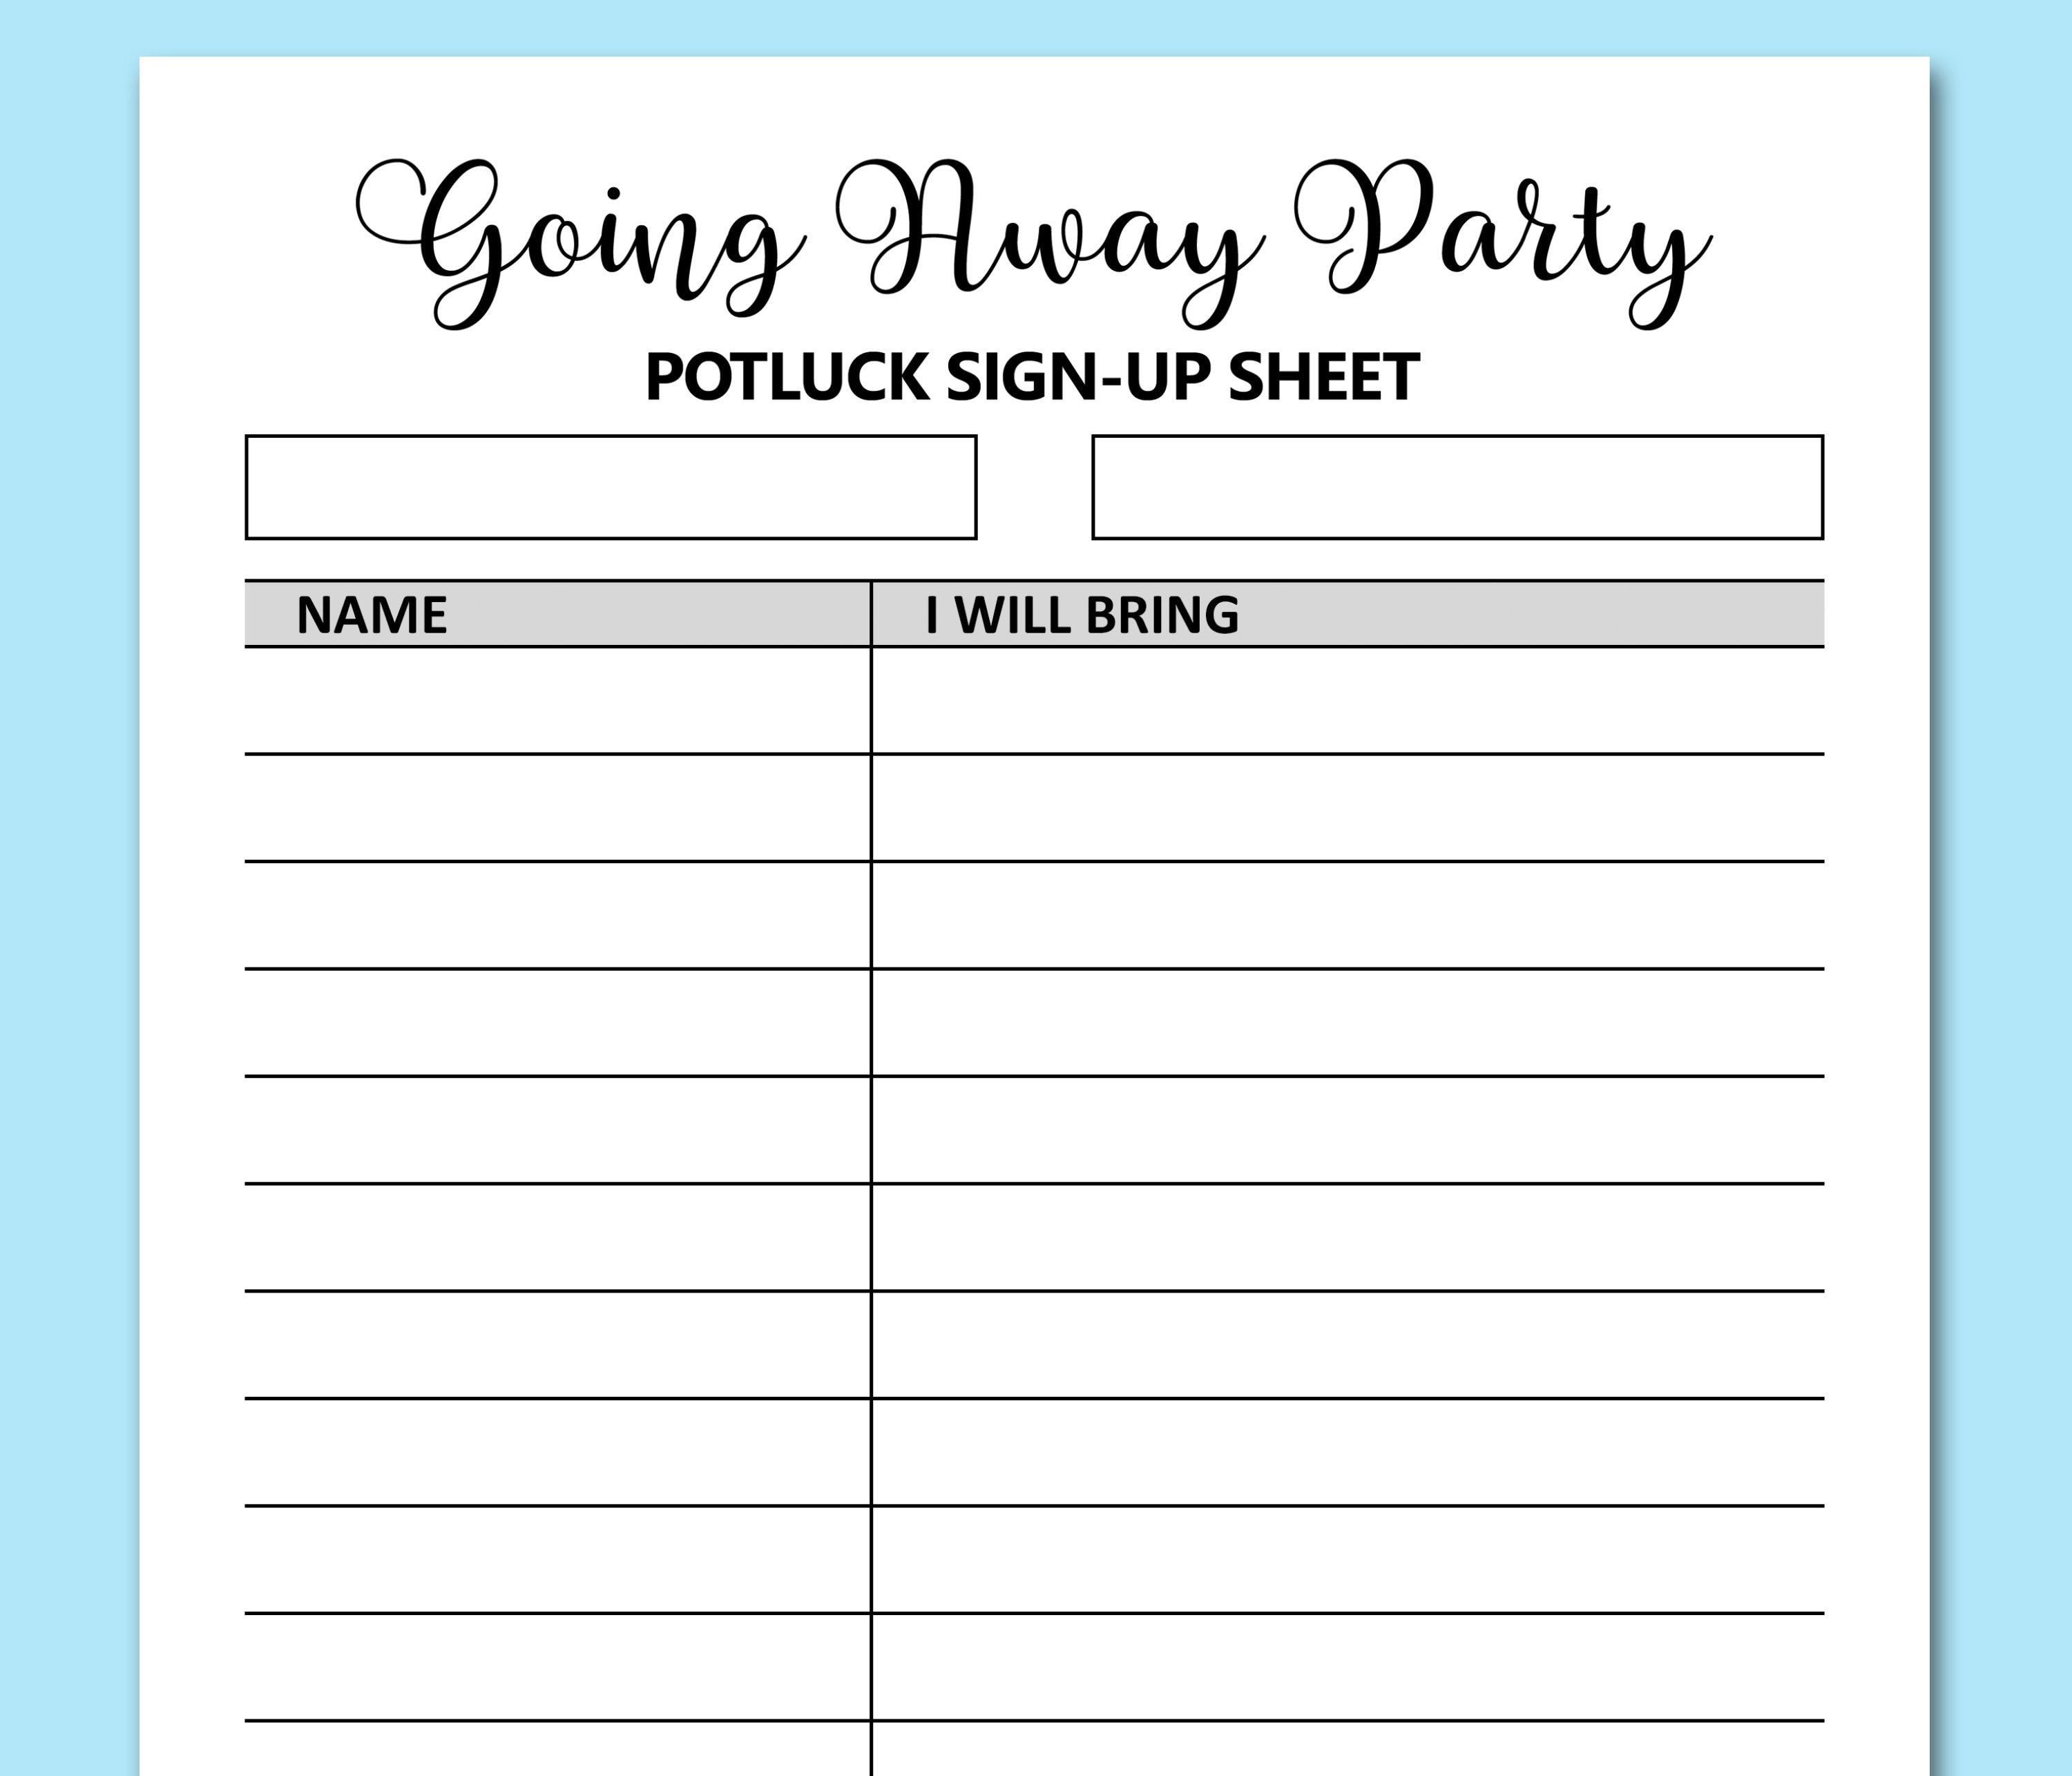 going-away-party-potluck-sign-up-sheet-printable-signup-form-etsy-ireland